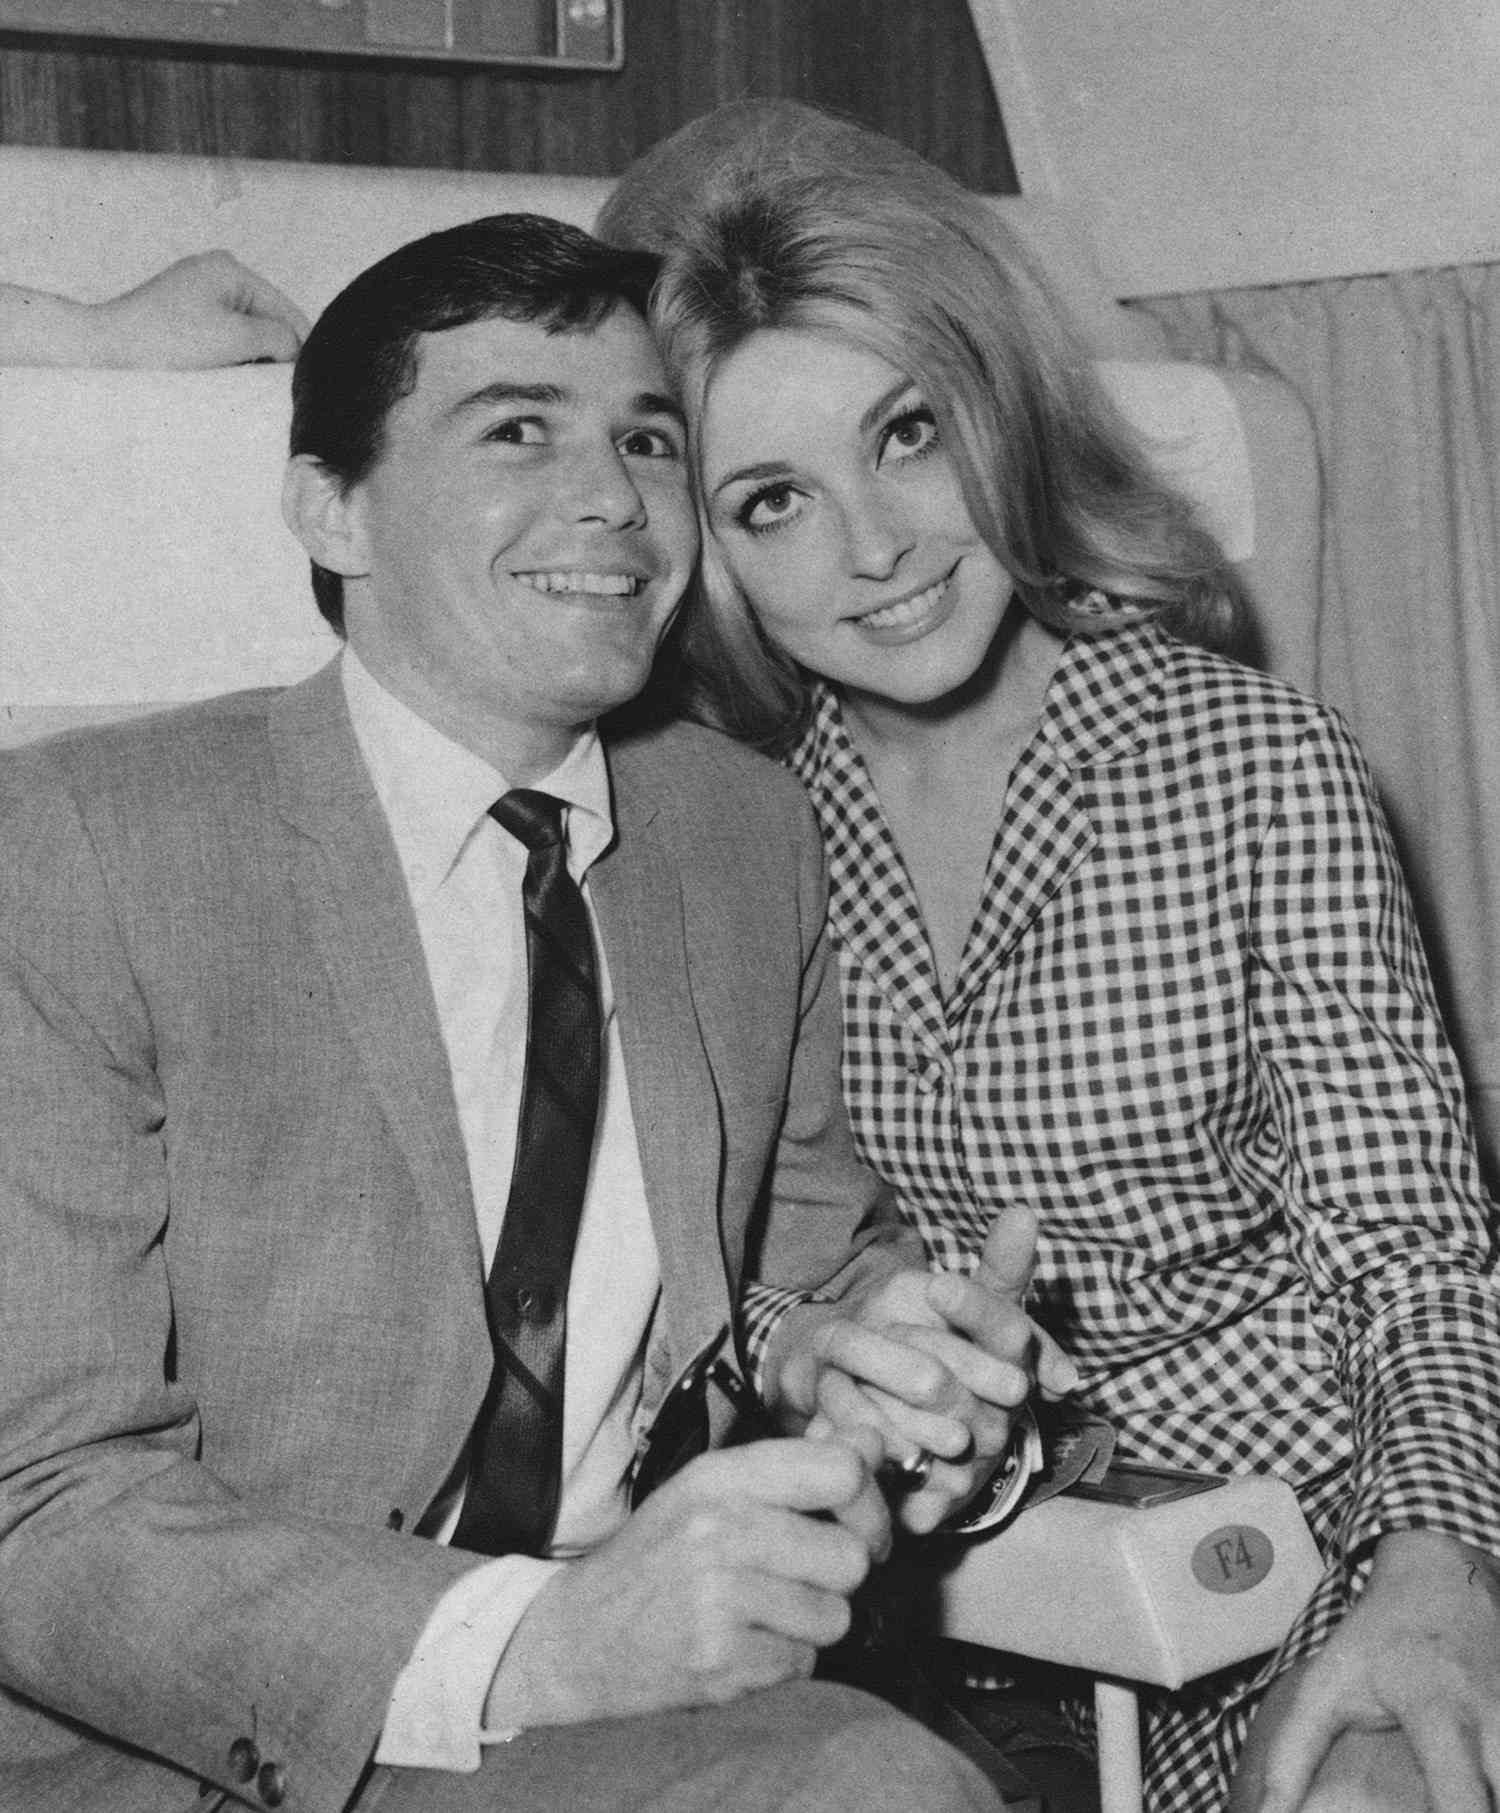 Sharon Tate and hair dresser Jay Sebring pose for a portrait on a plane circa 1966